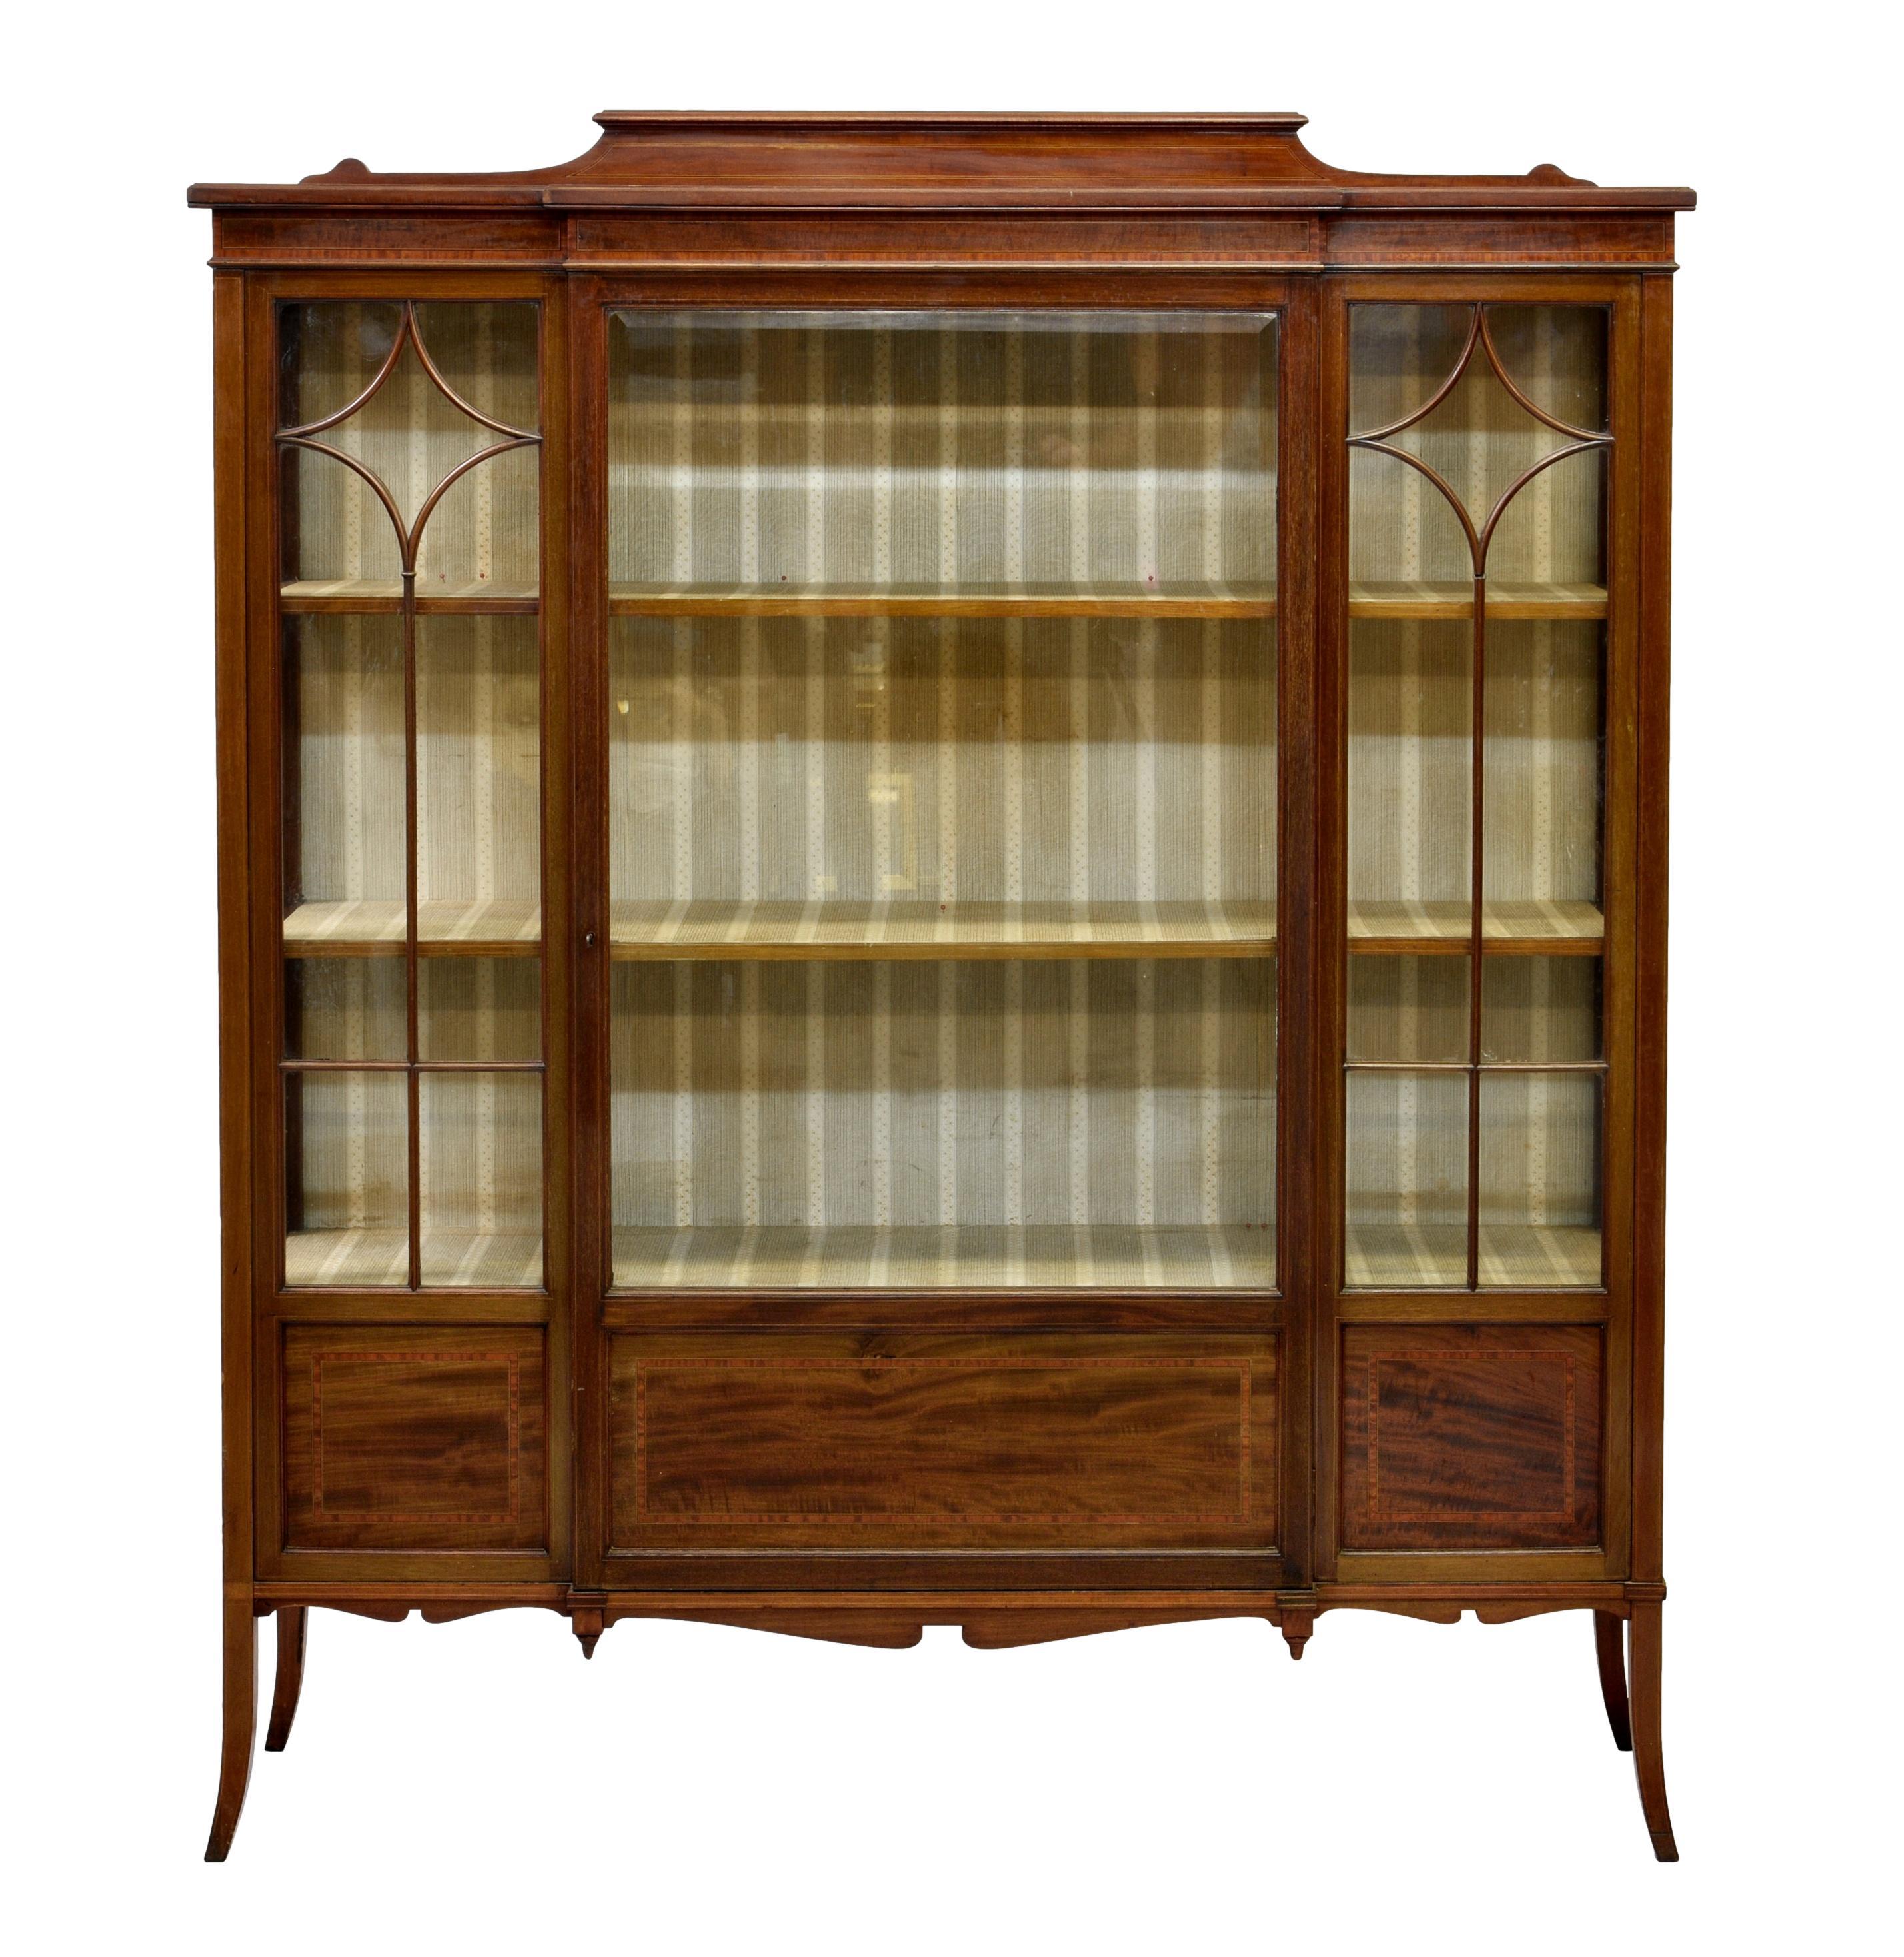 English Antique Edwardian Display Cabinet by Maple & Co C1900